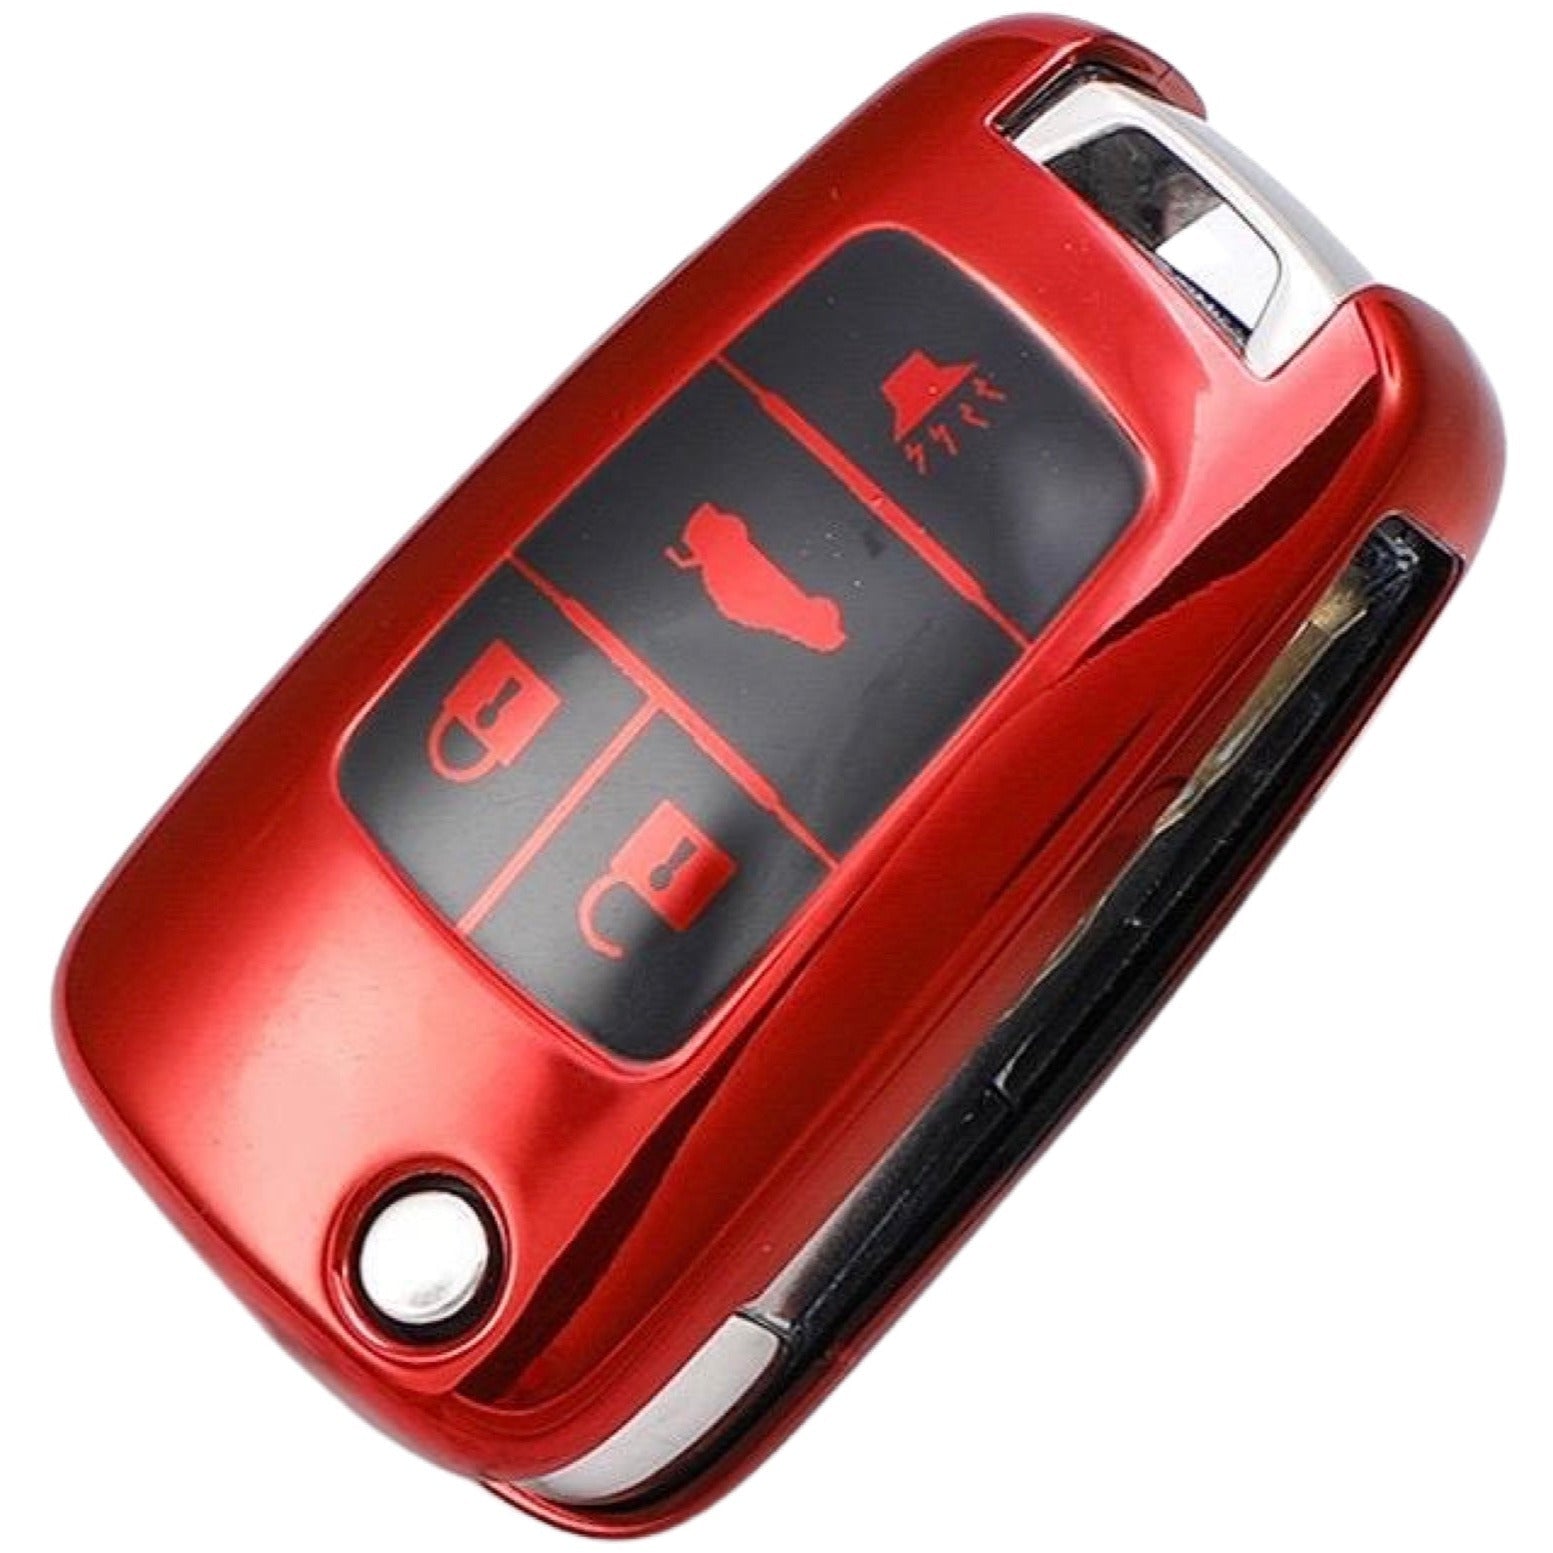 Holden Key Cover red | Commodore | Keysleeves car accessories